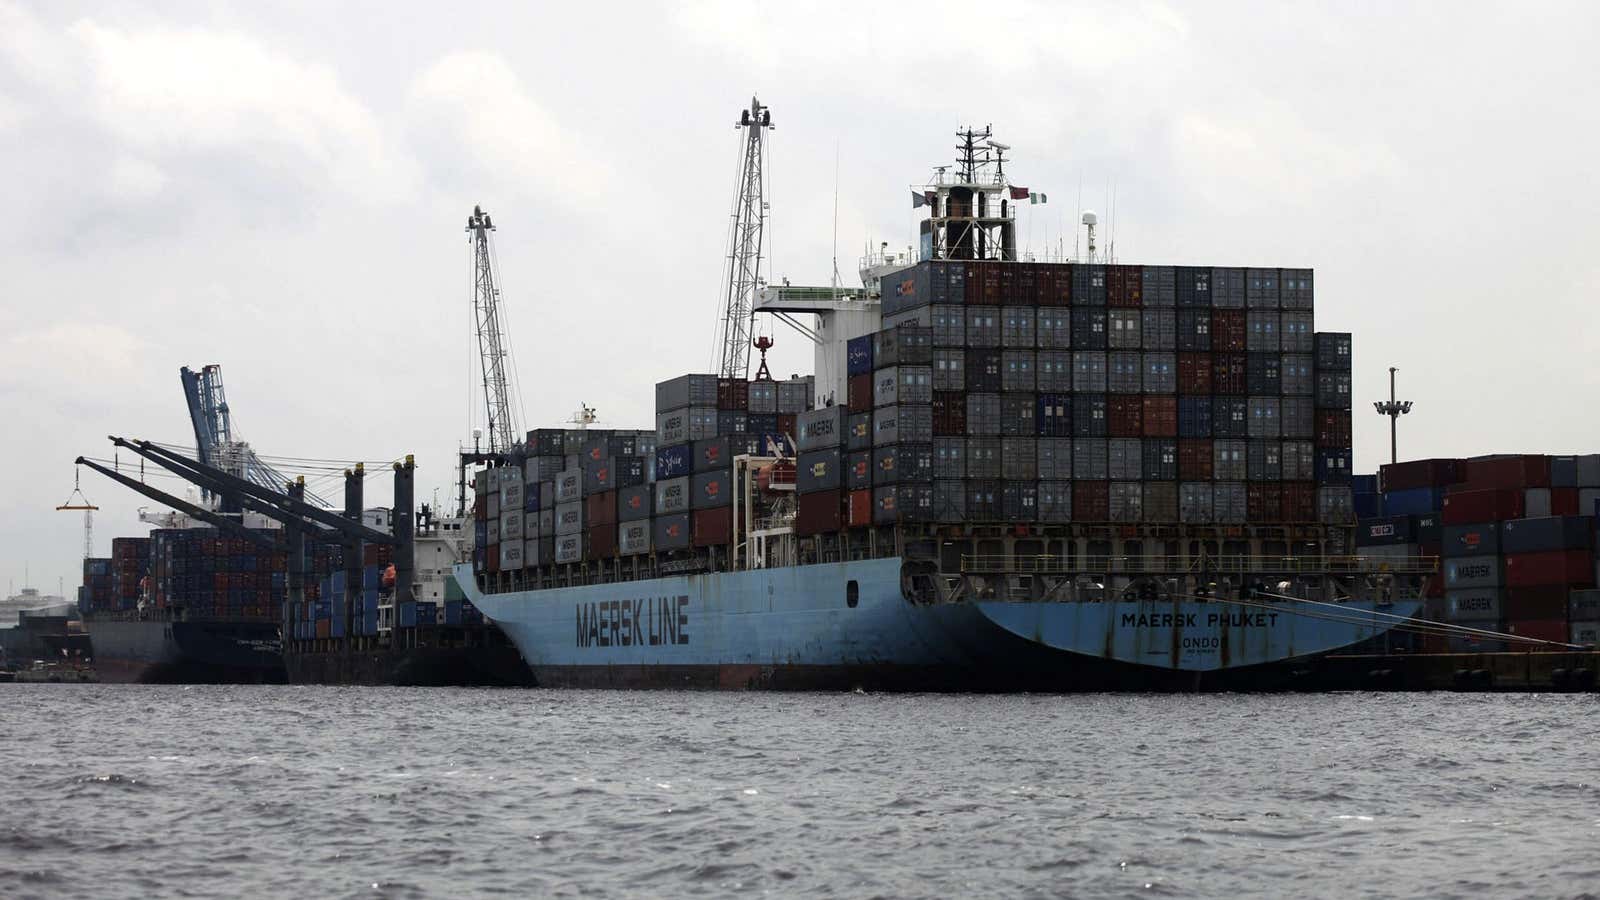 A container vessel berths to discharge containers at Apapa port in Nigeria’s commercial capital Lagos